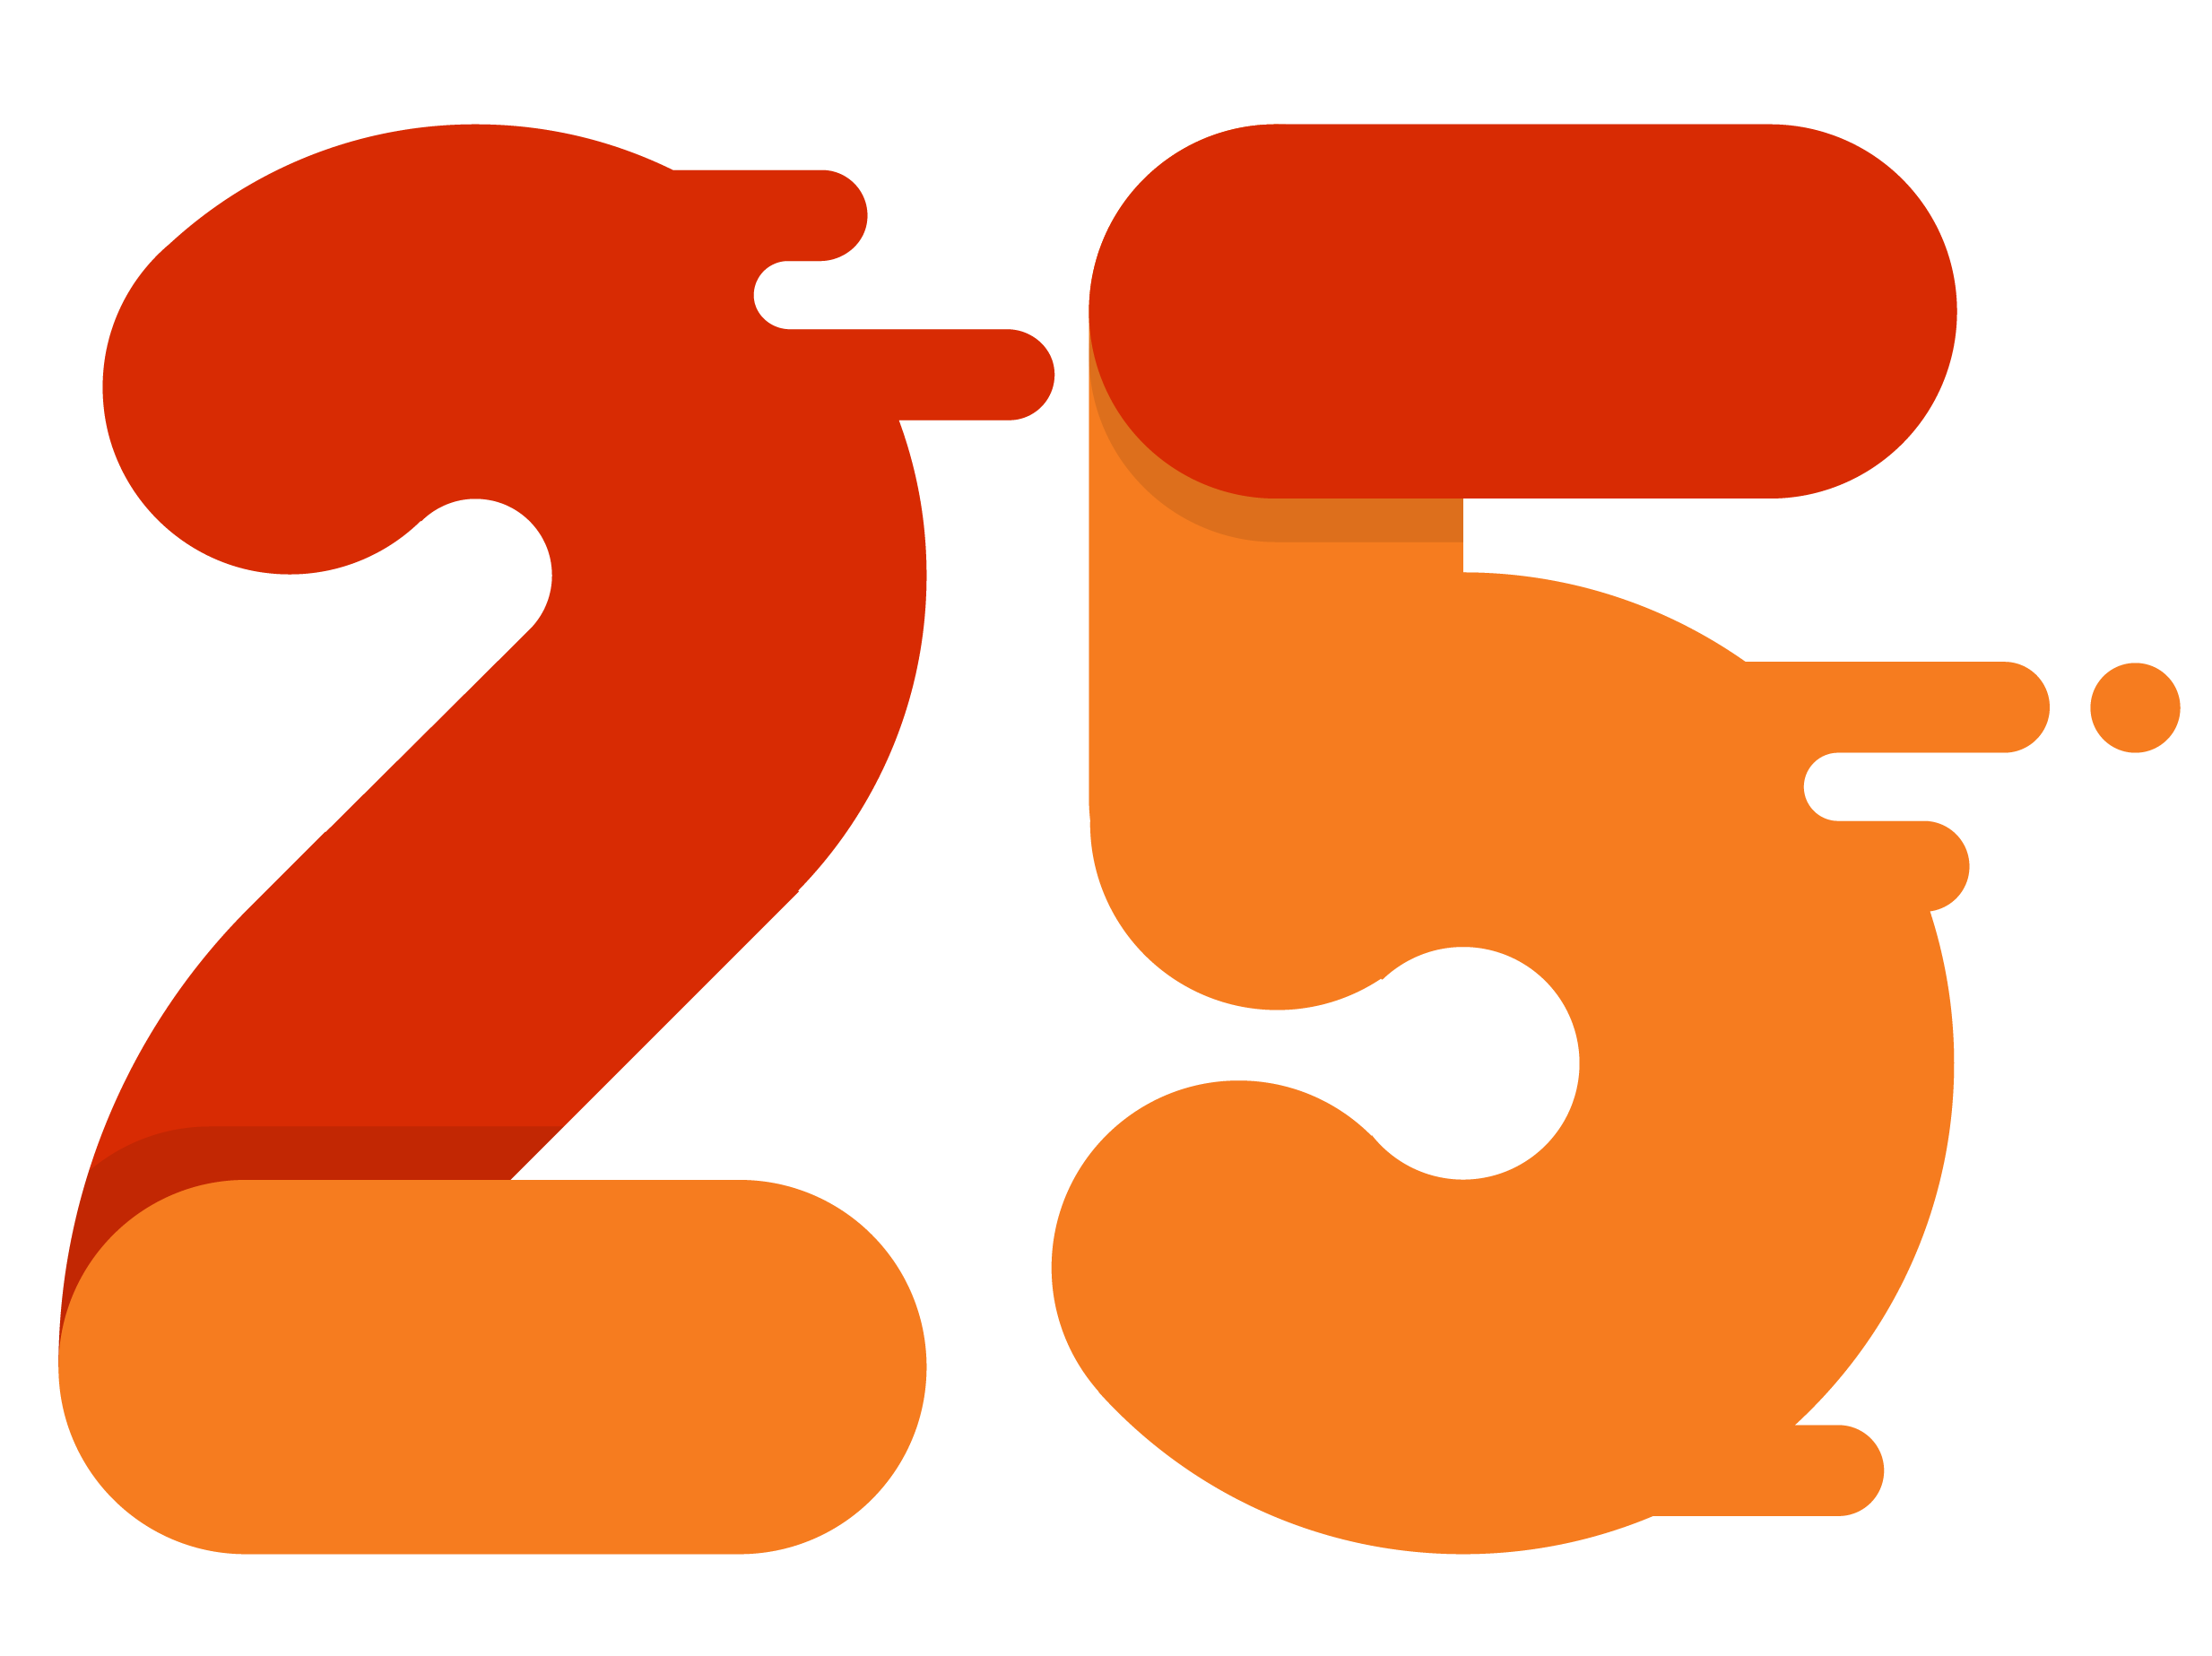 25 Number PNG Images Transparent Background | PNG Play